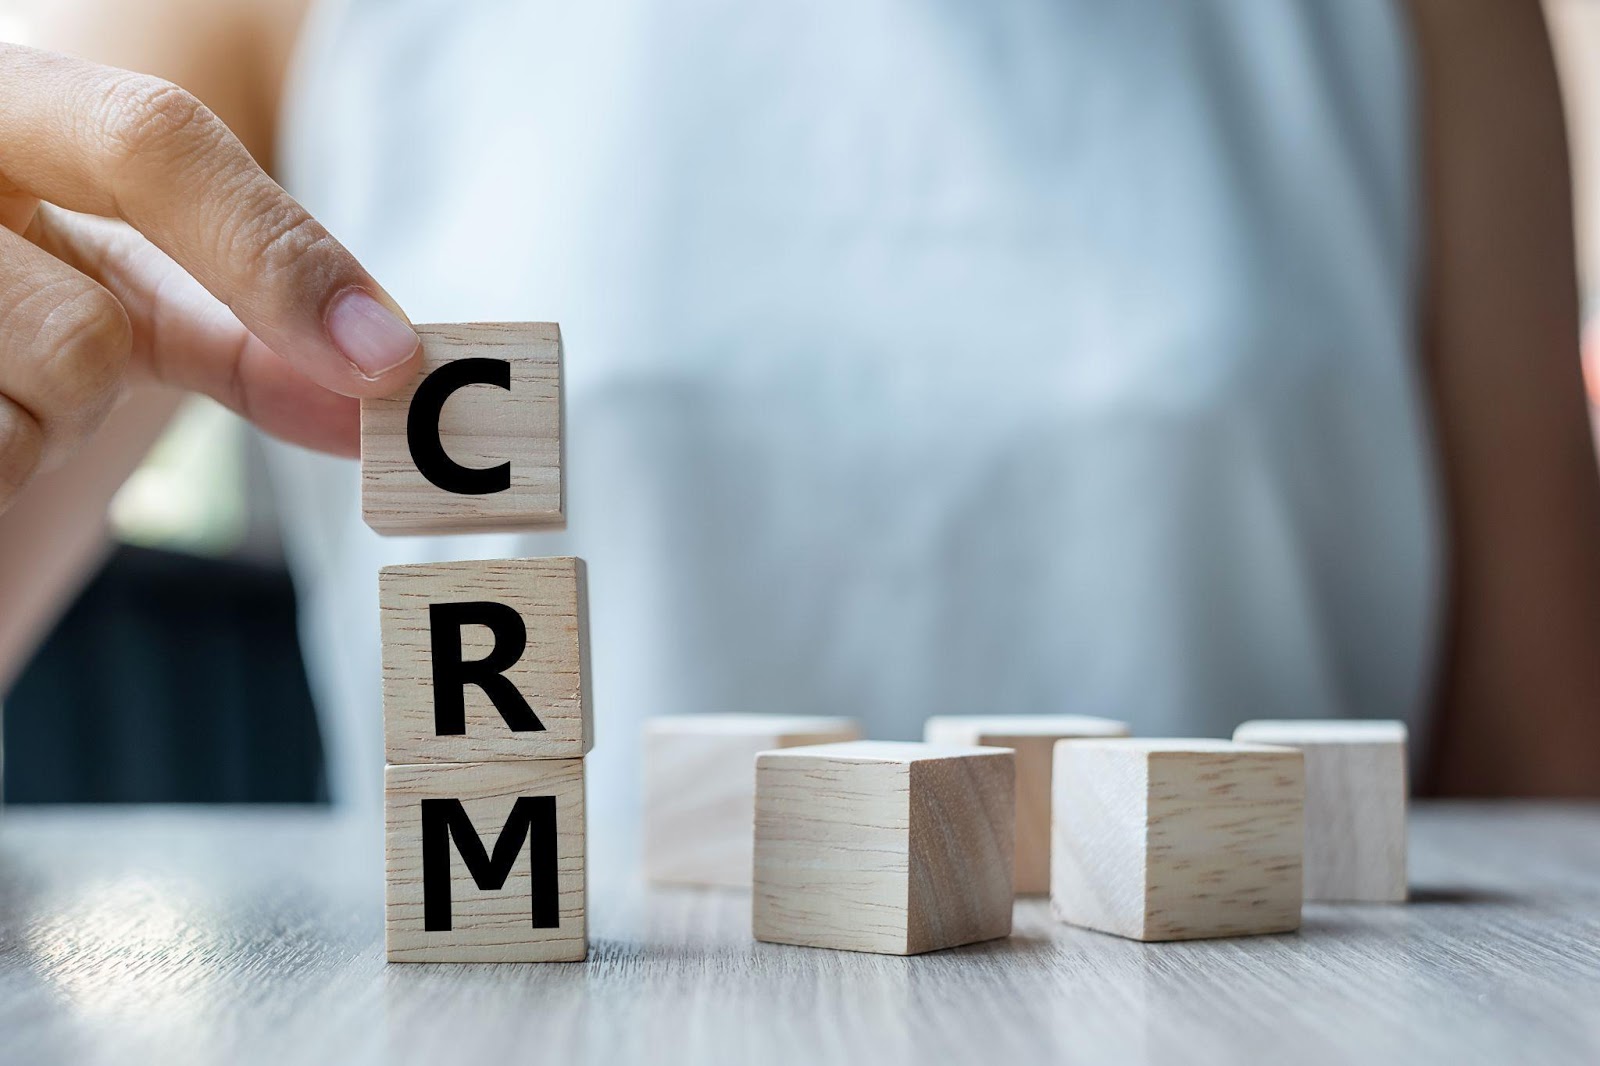 building blocks are stacked to spell "CRM" 